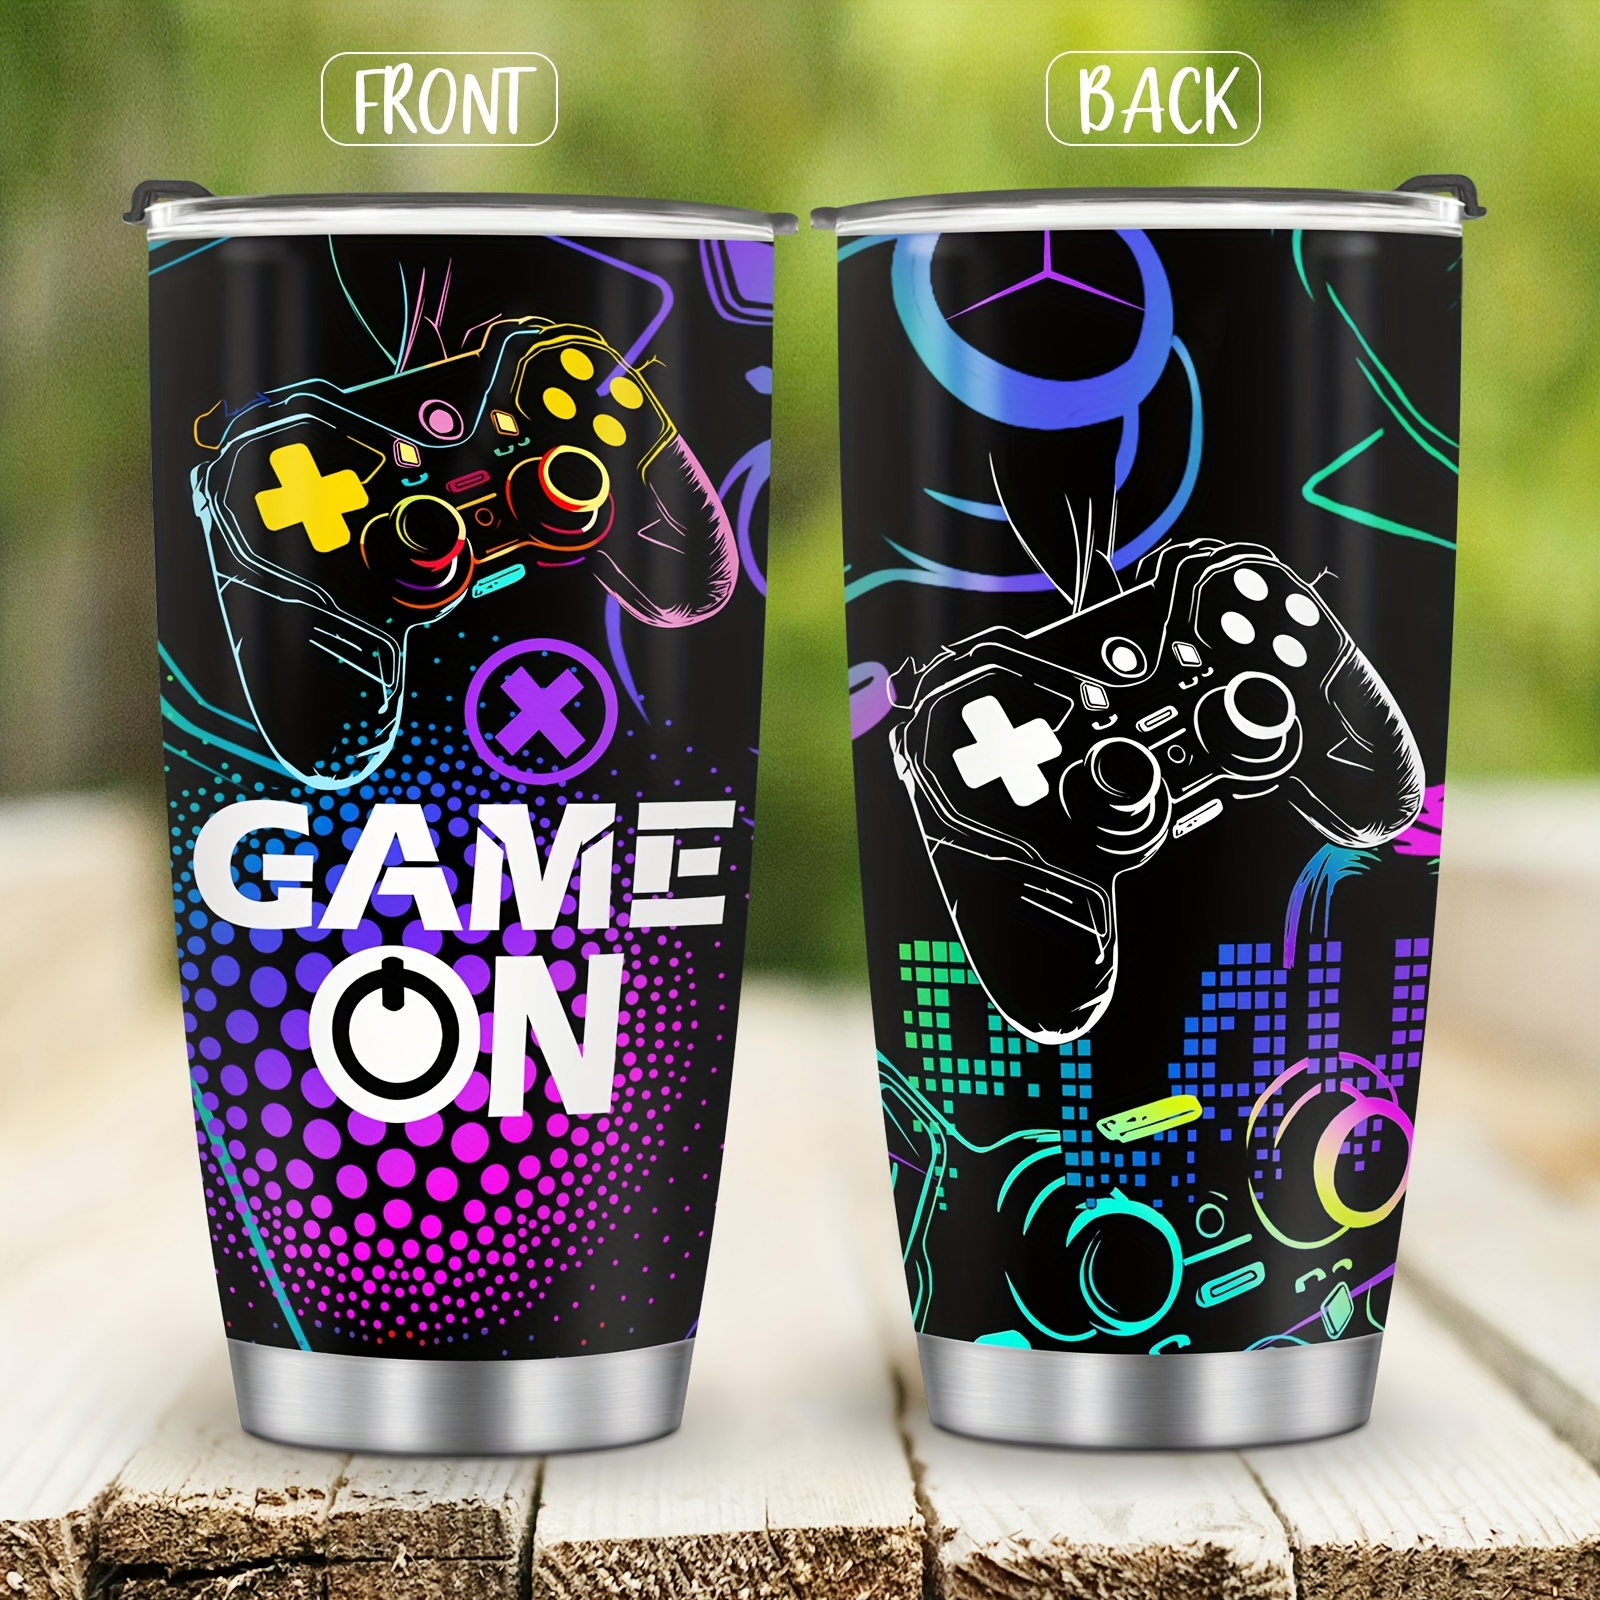 wowcugi Gamer Gifts For Men Teen Boys Personalized Gamer Tumbler with  Custom Name Stainless Steel Cu…See more wowcugi Gamer Gifts For Men Teen  Boys